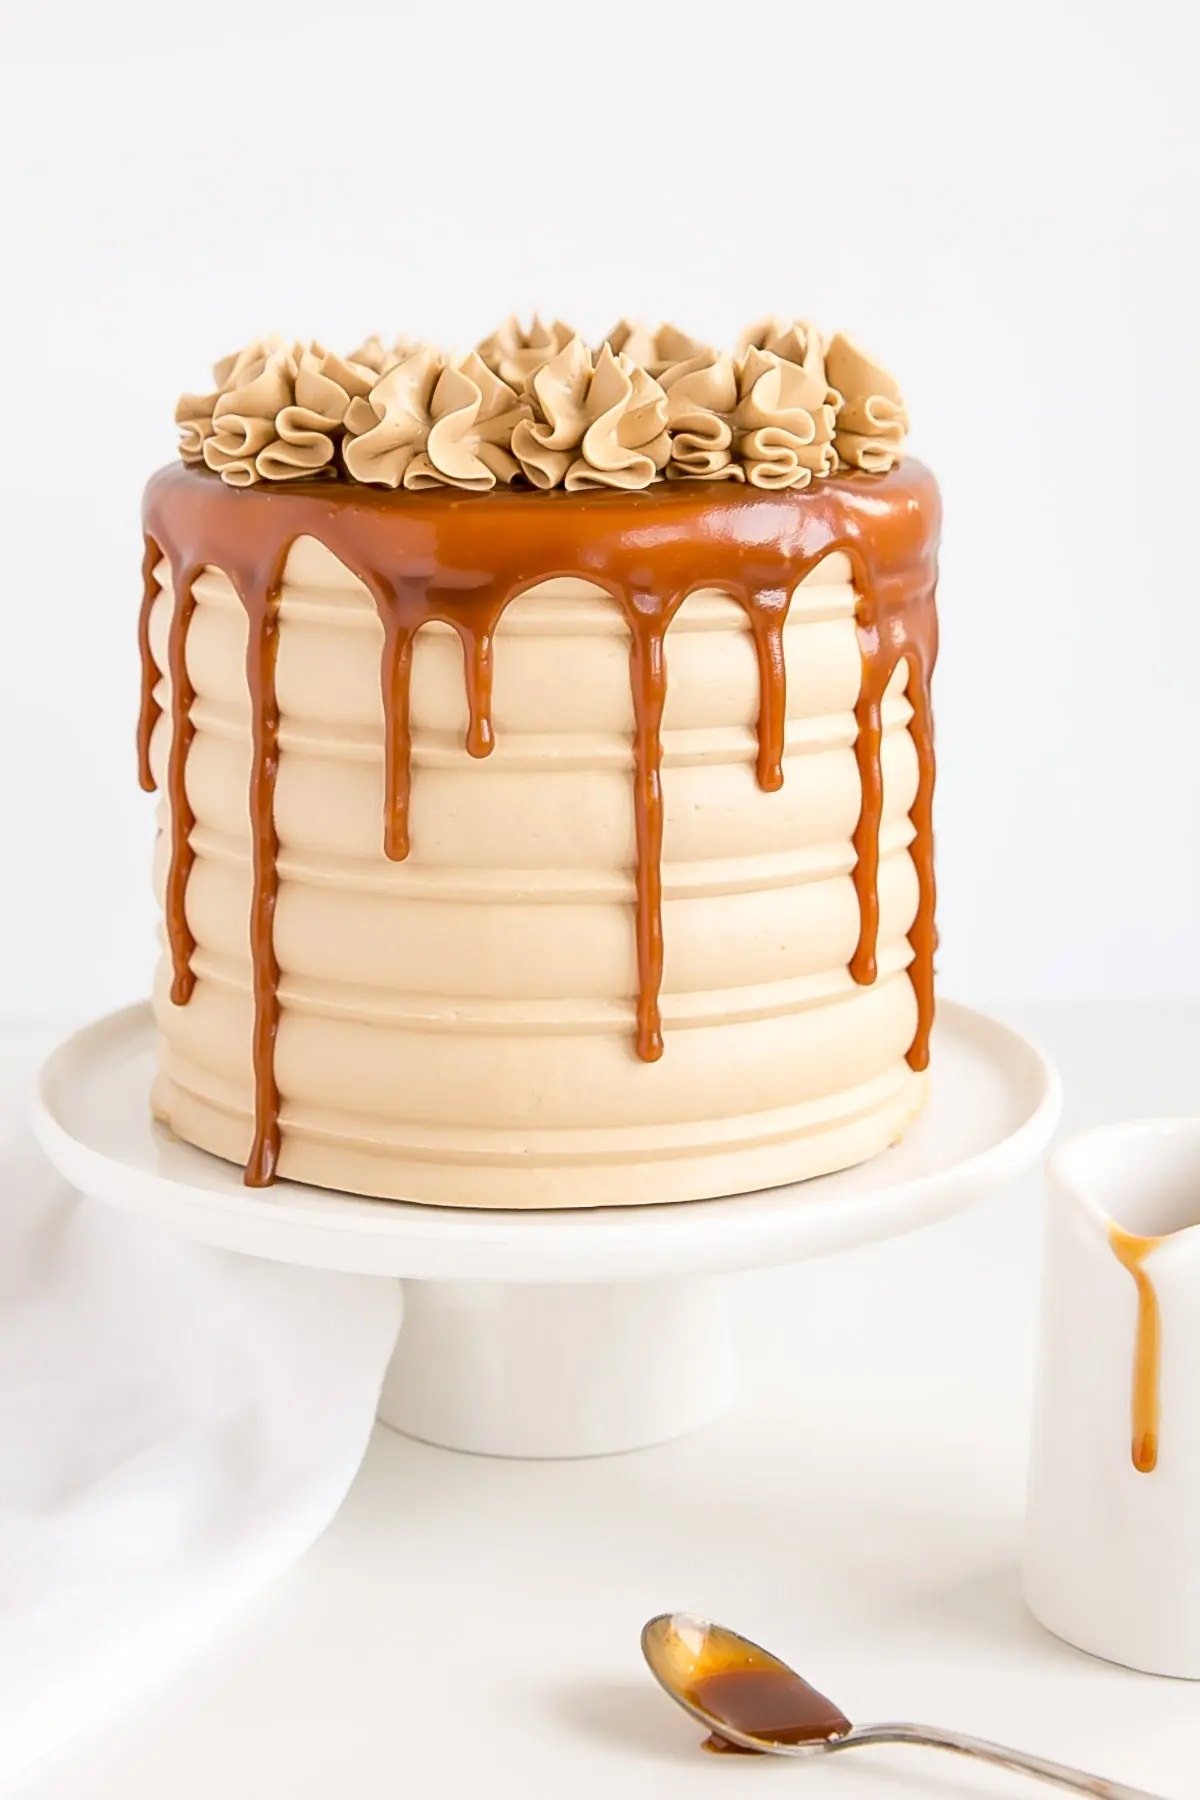 Caramel Cake with a small pitcher of caramel on the side. Caramel drip and rosettes.